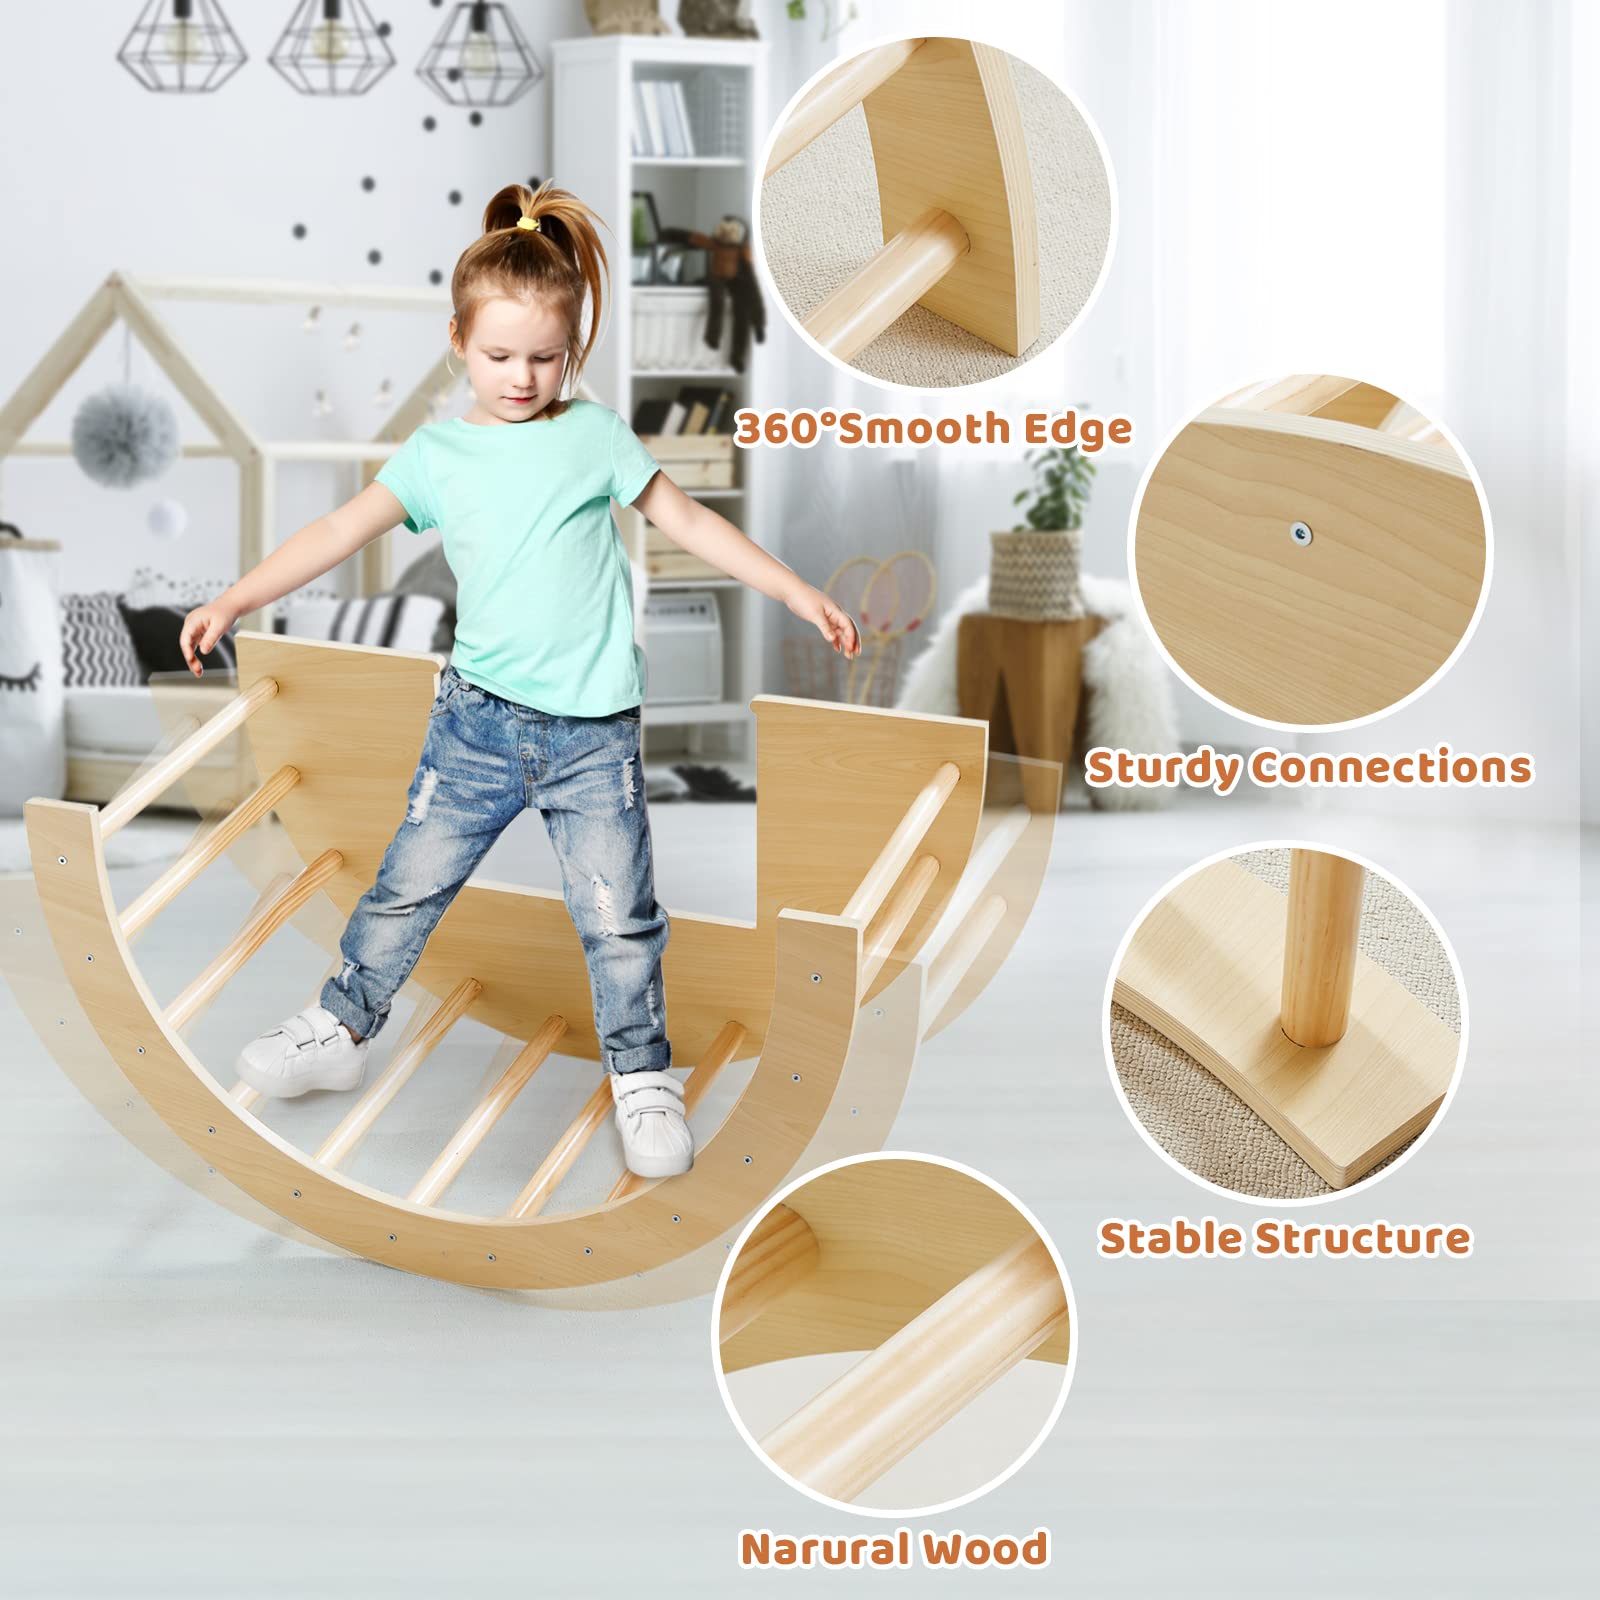 Beright 5 in1 Climbing Arch Sensory Table for Kids, Montessori Climbing Gym, Rocker Board Wooden Toy with Collapsible Storage Bin, Learning Playset